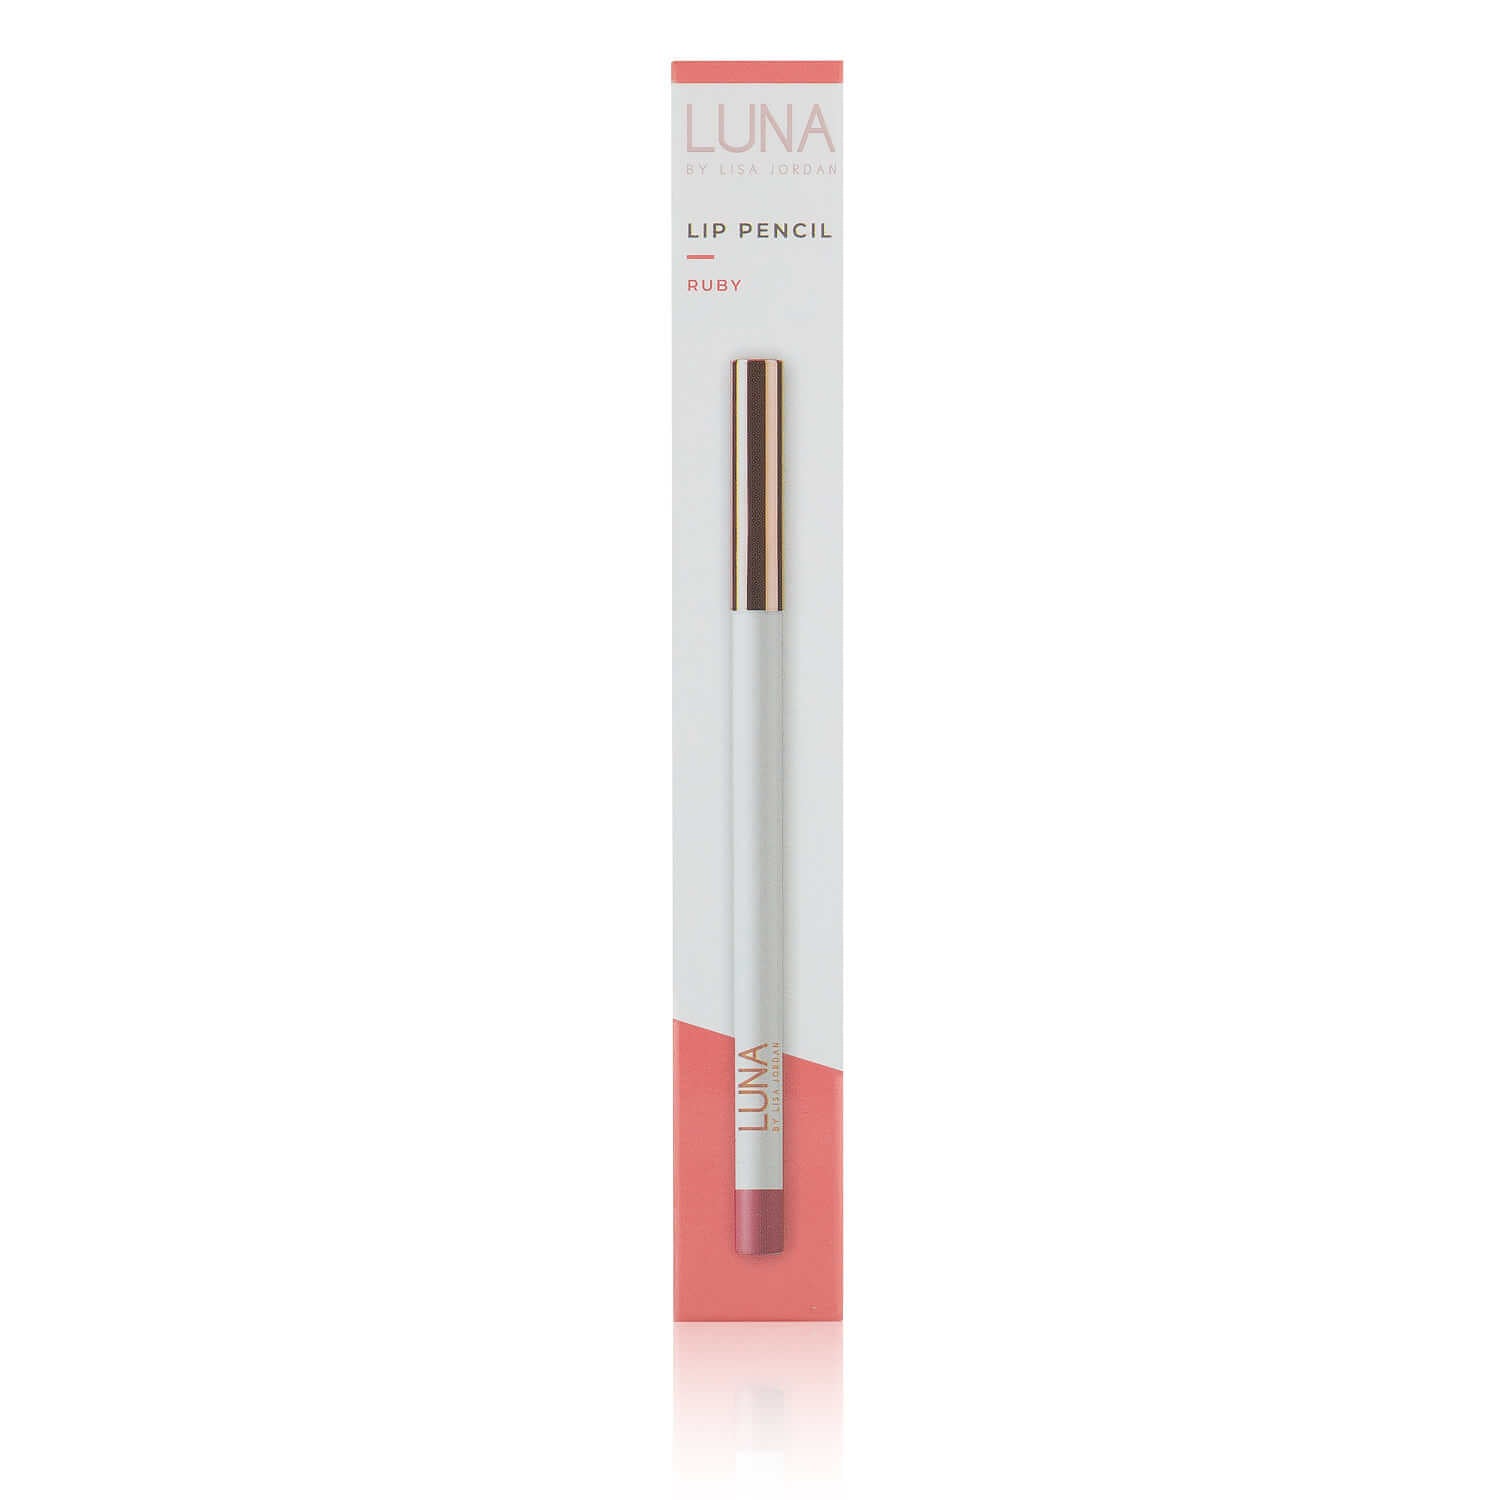 Luna By Lisa Ruby Lip Pencil 1 Shaws Department Stores